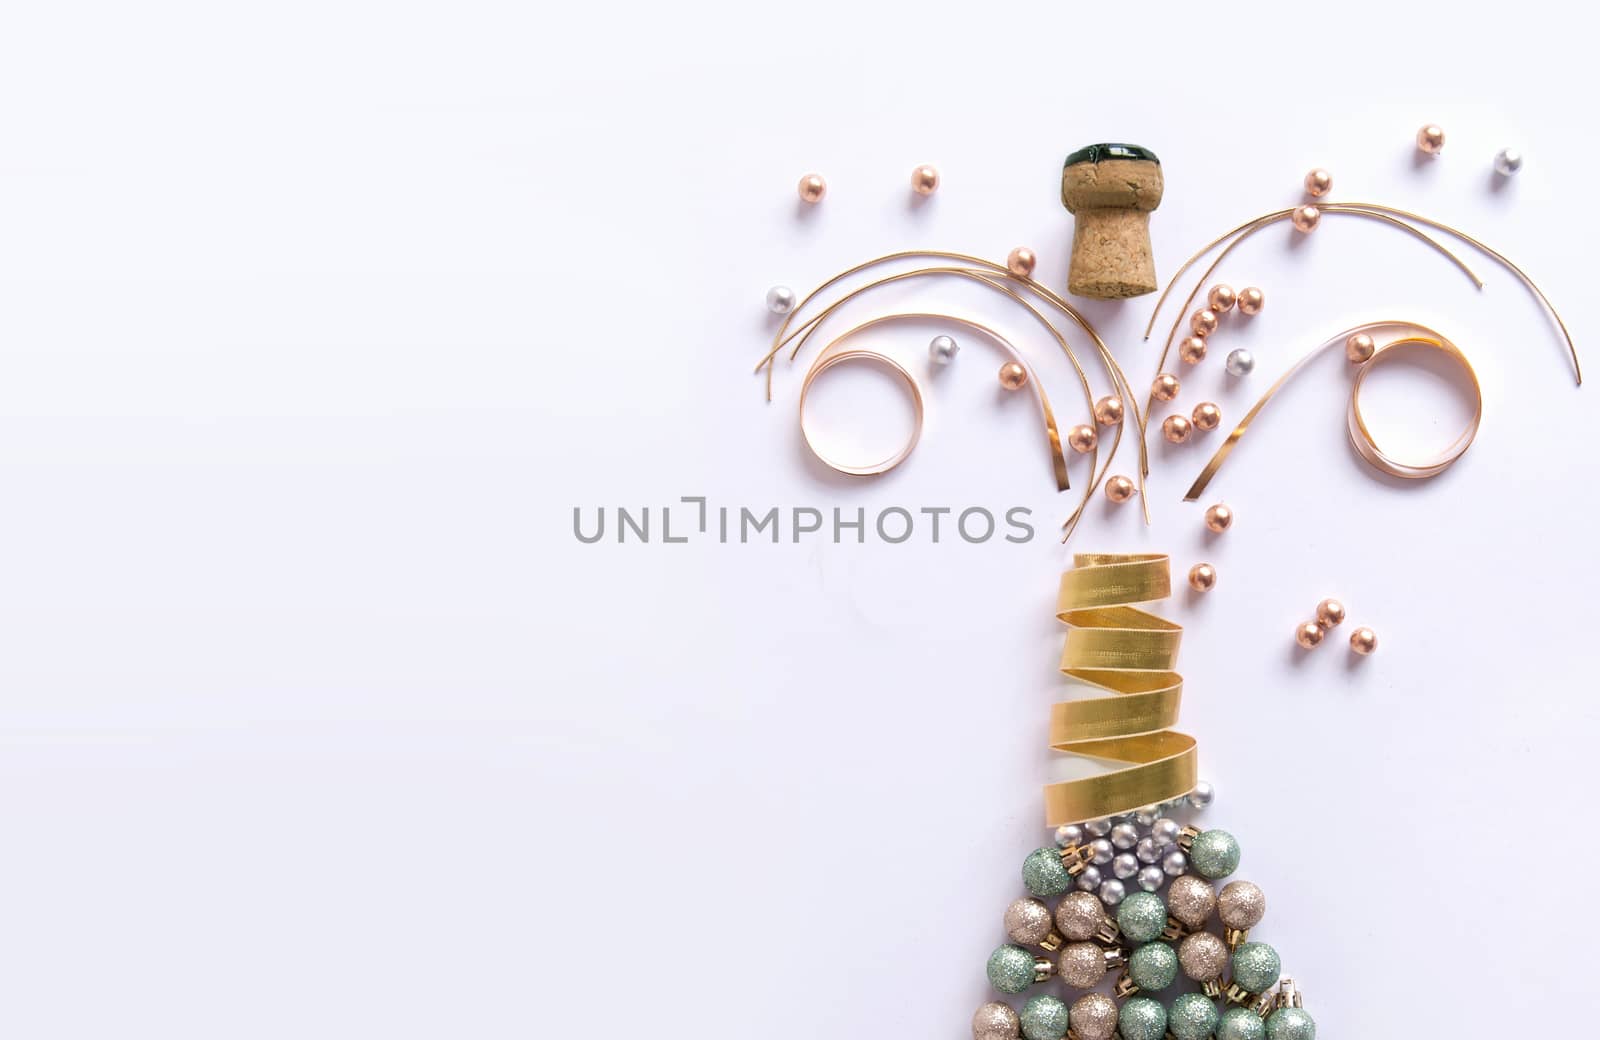 Champagne bottle made from decorations including baubles and ribbon